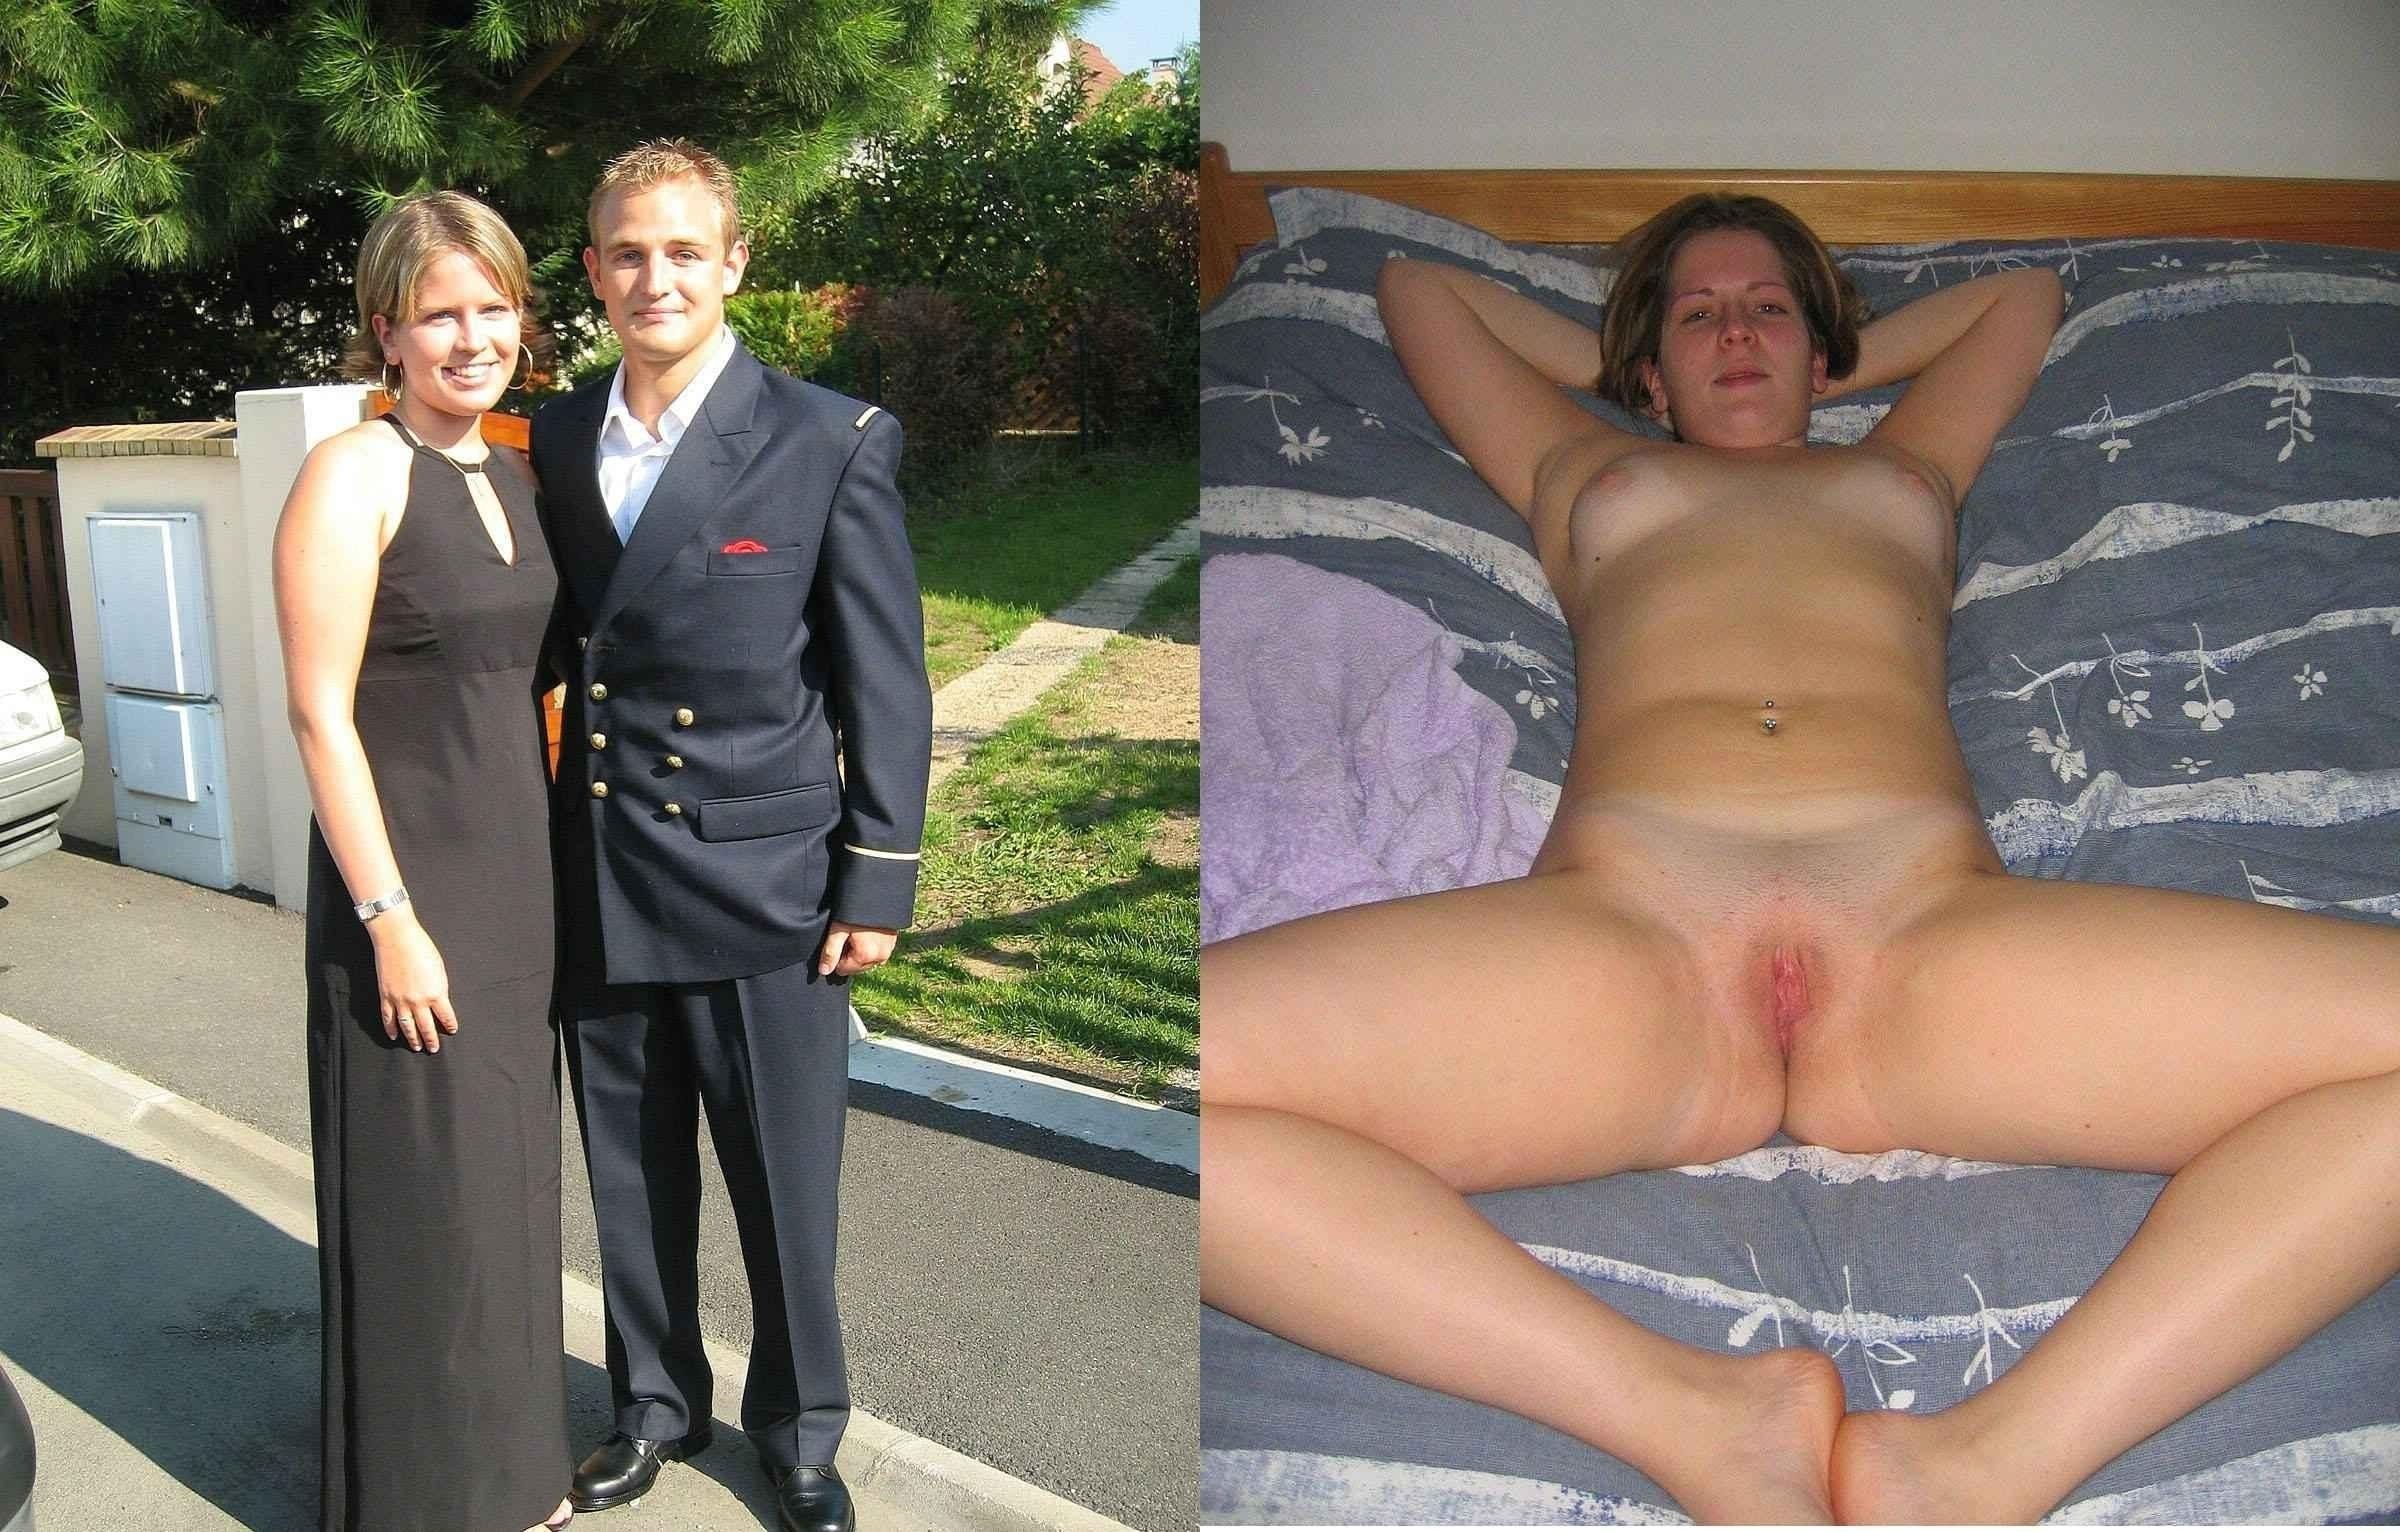 clothed wife and nude husband